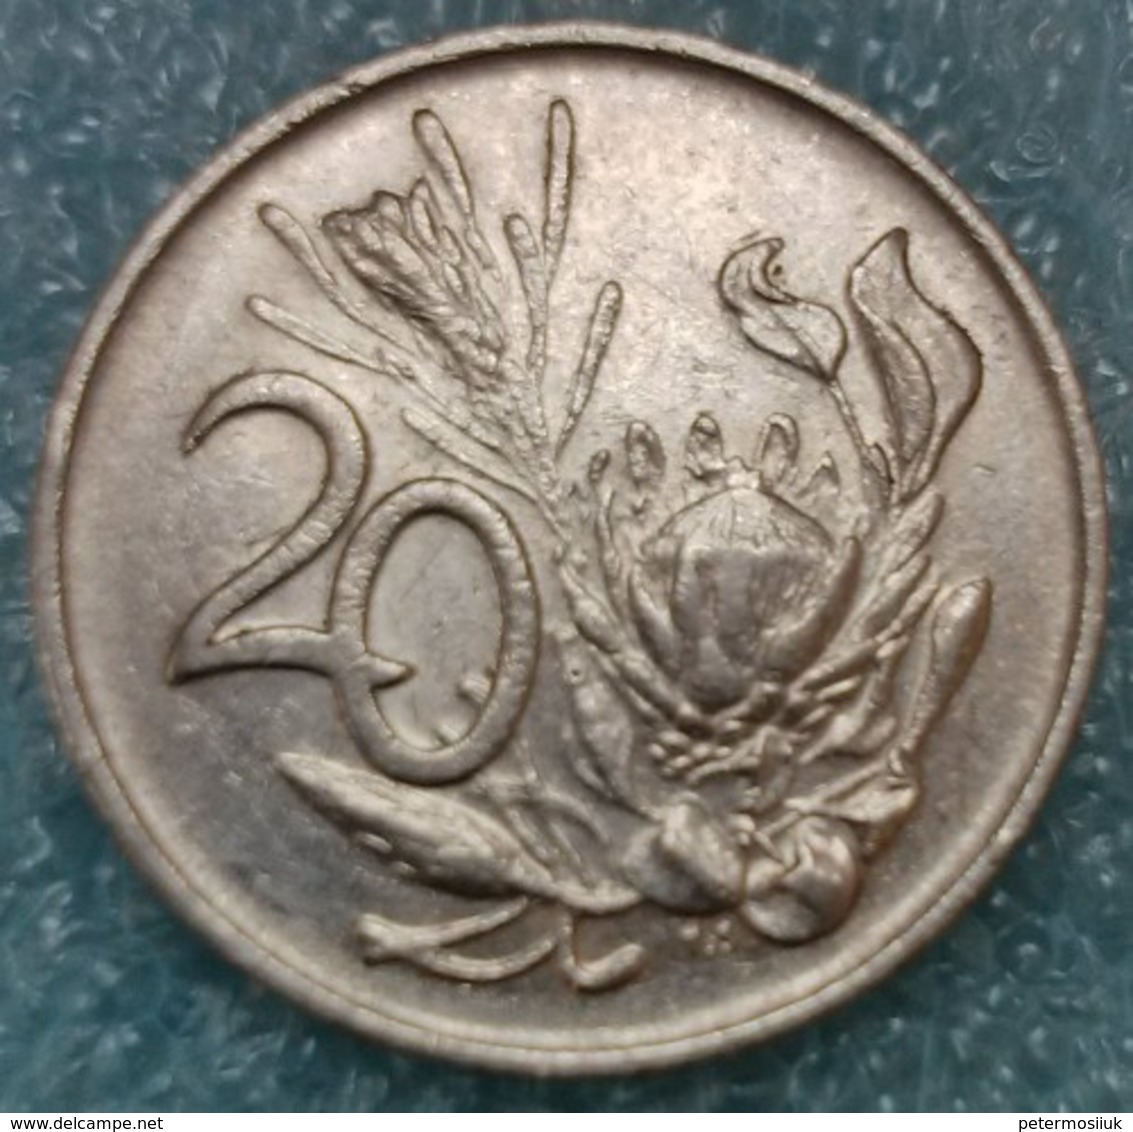 South Africa 20 Cents, 1980 -0874 - South Africa